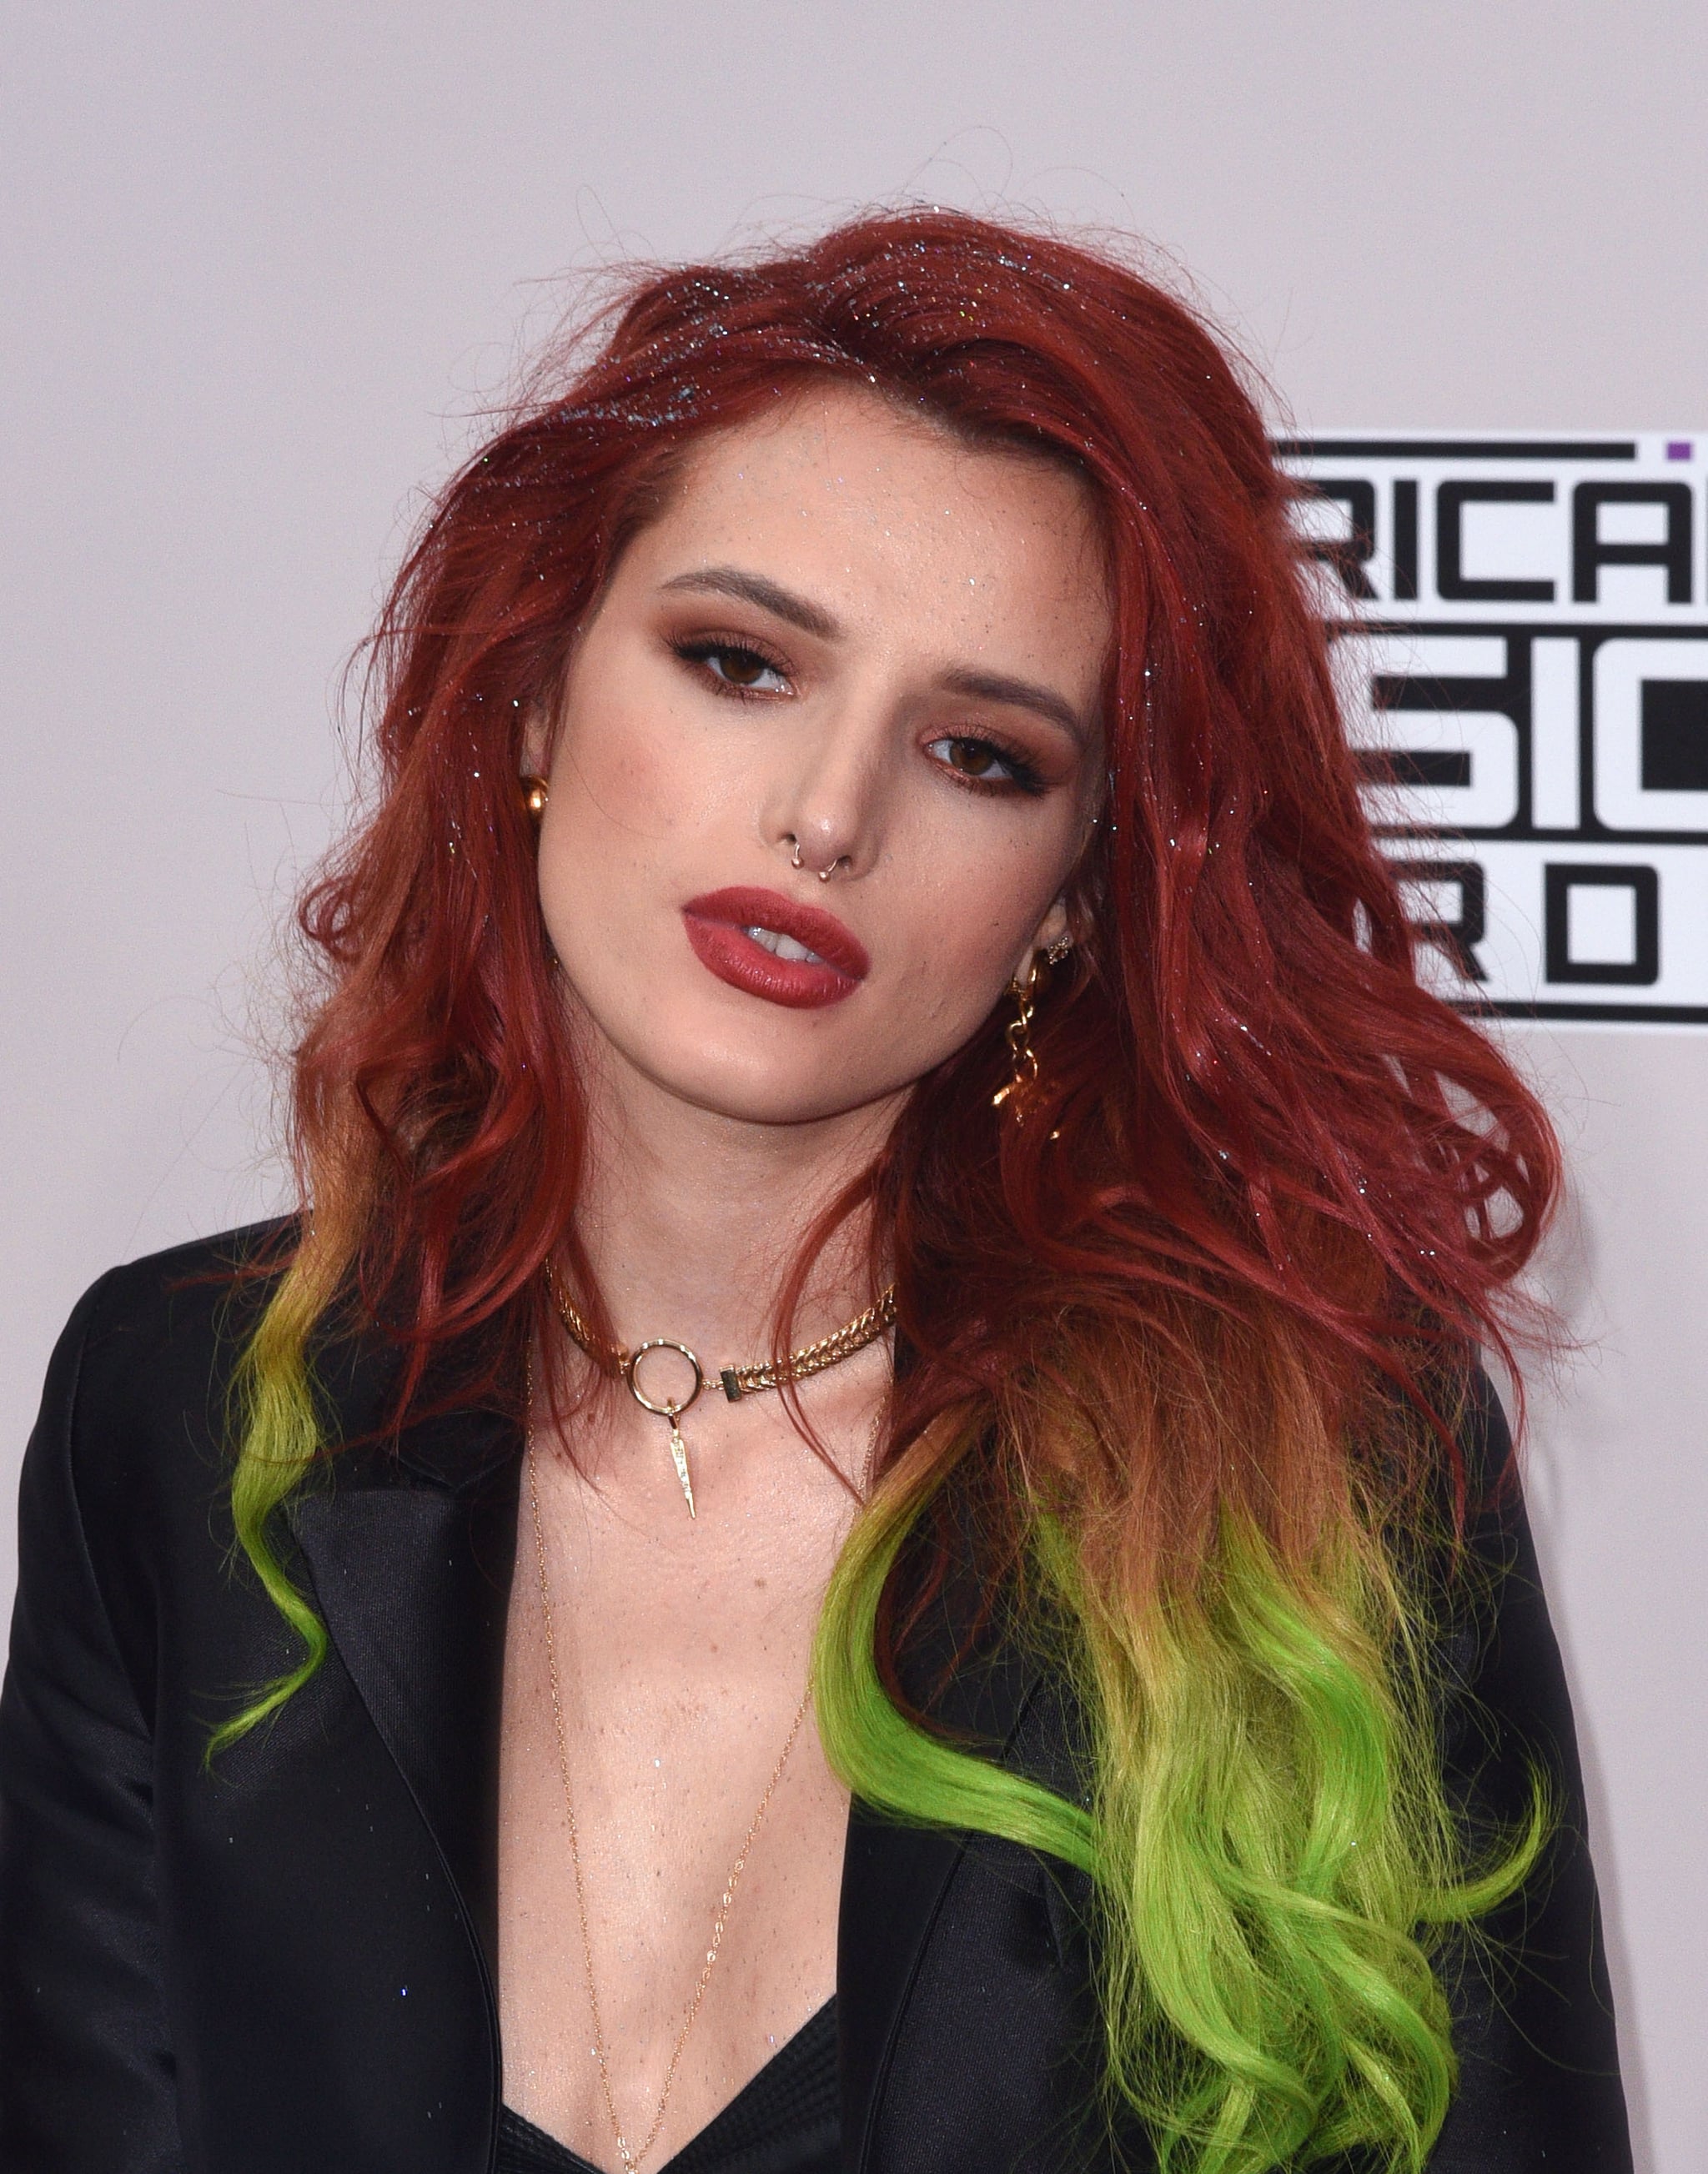 Bella Thorne With Dark Red Hair Green Ends | Bella Thorne Has Tried Many Hair Over the Years, but This One Is Her Natural Hue | POPSUGAR Beauty Photo